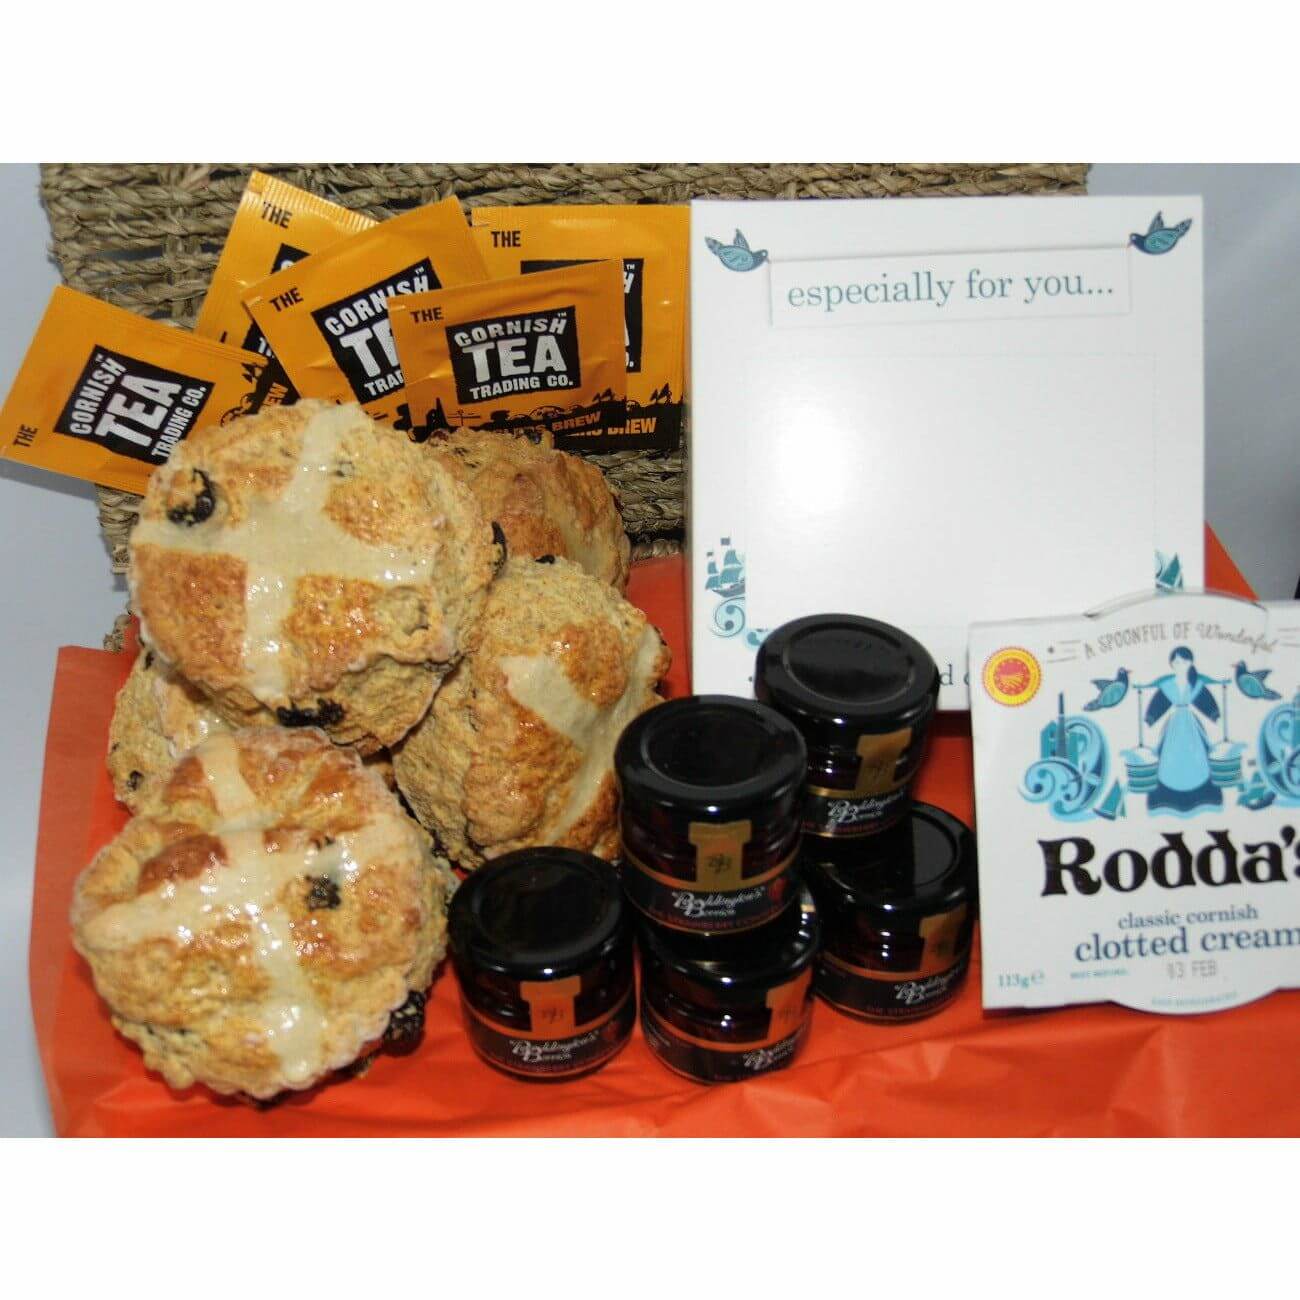 hot cross cornish cream tea hamper with our delicious hot cross scones - for one to four - from £20.95